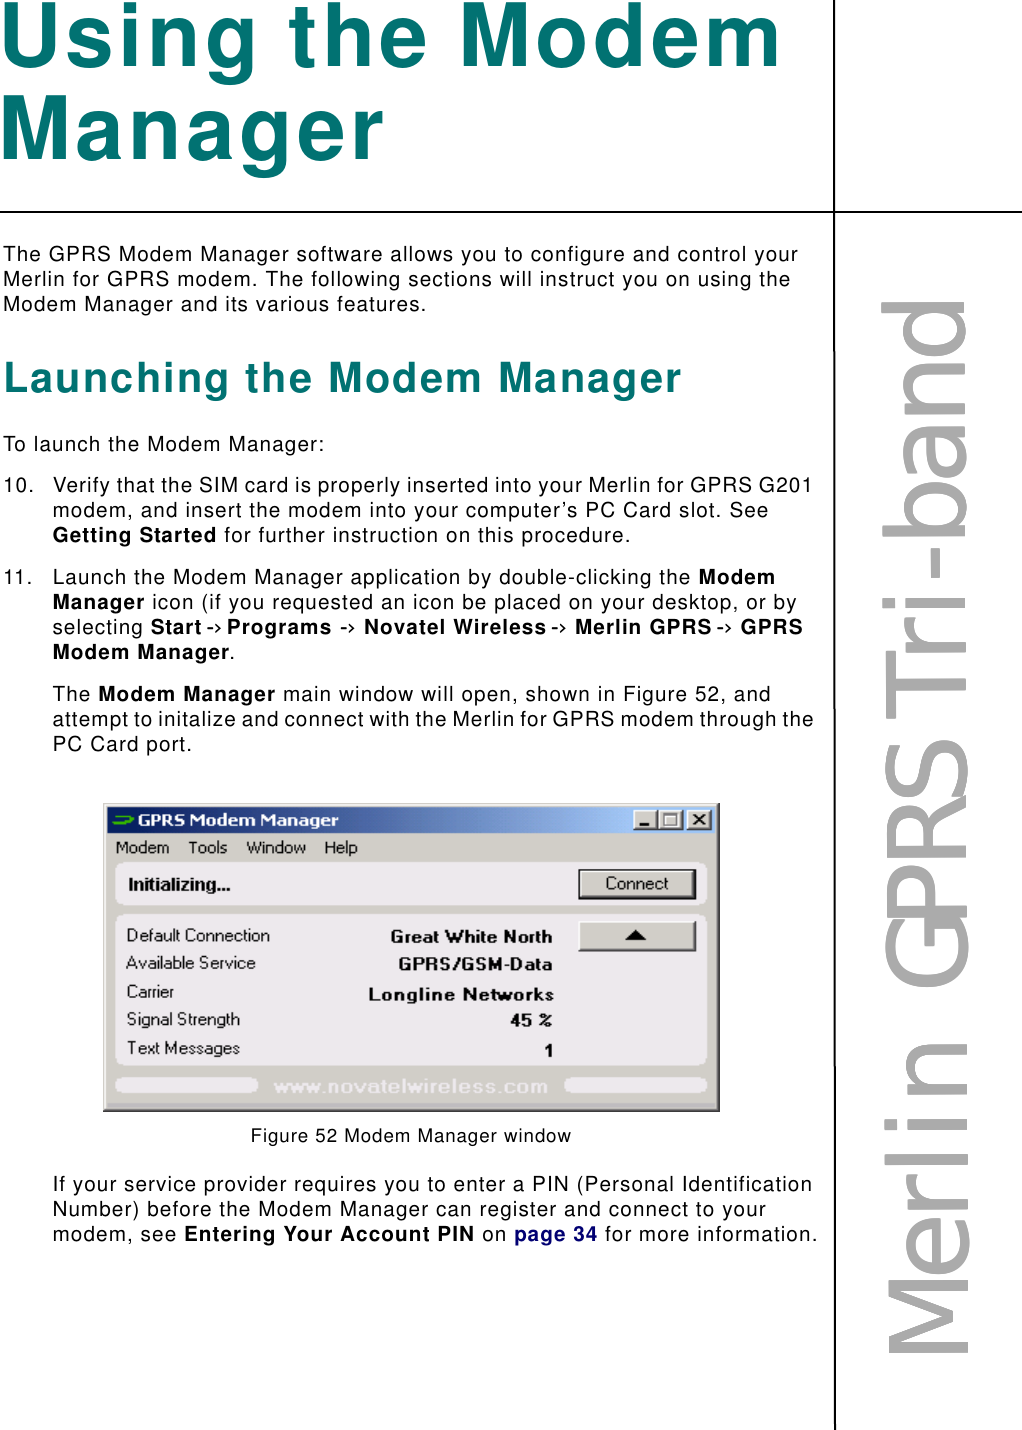 MMMMeeeerrrrlllliiiinnnn        GGGGPPPPRRRRSSSS    TTTTrrrriiii----bbbbaaaannnnddddUsing the Modem ManagerThe GPRS Modem Manager software allows you to configure and control your Merlin for GPRS modem. The following sections will instruct you on using the Modem Manager and its various features.Launching the Modem ManagerTo launch the Modem Manager:10. Verify that the SIM card is properly inserted into your Merlin for GPRS G201 modem, and insert the modem into your computer’s PC Card slot. See Getting Started for further instruction on this procedure.11. Launch the Modem Manager application by double-clicking the Modem Manager icon (if you requested an icon be placed on your desktop, or by selecting Start -&gt; Programs-&gt;Novatel Wireless -&gt;Merlin GPRS -&gt;GPRS Modem Manager.The Modem Manager main window will open, shown in Figure 52, and attempt to initalize and connect with the Merlin for GPRS modem through the PC Card port. Figure 52 Modem Manager windowIf your service provider requires you to enter a PIN (Personal Identification Number) before the Modem Manager can register and connect to your modem, see Entering Your Account PIN on page 34 for more information.